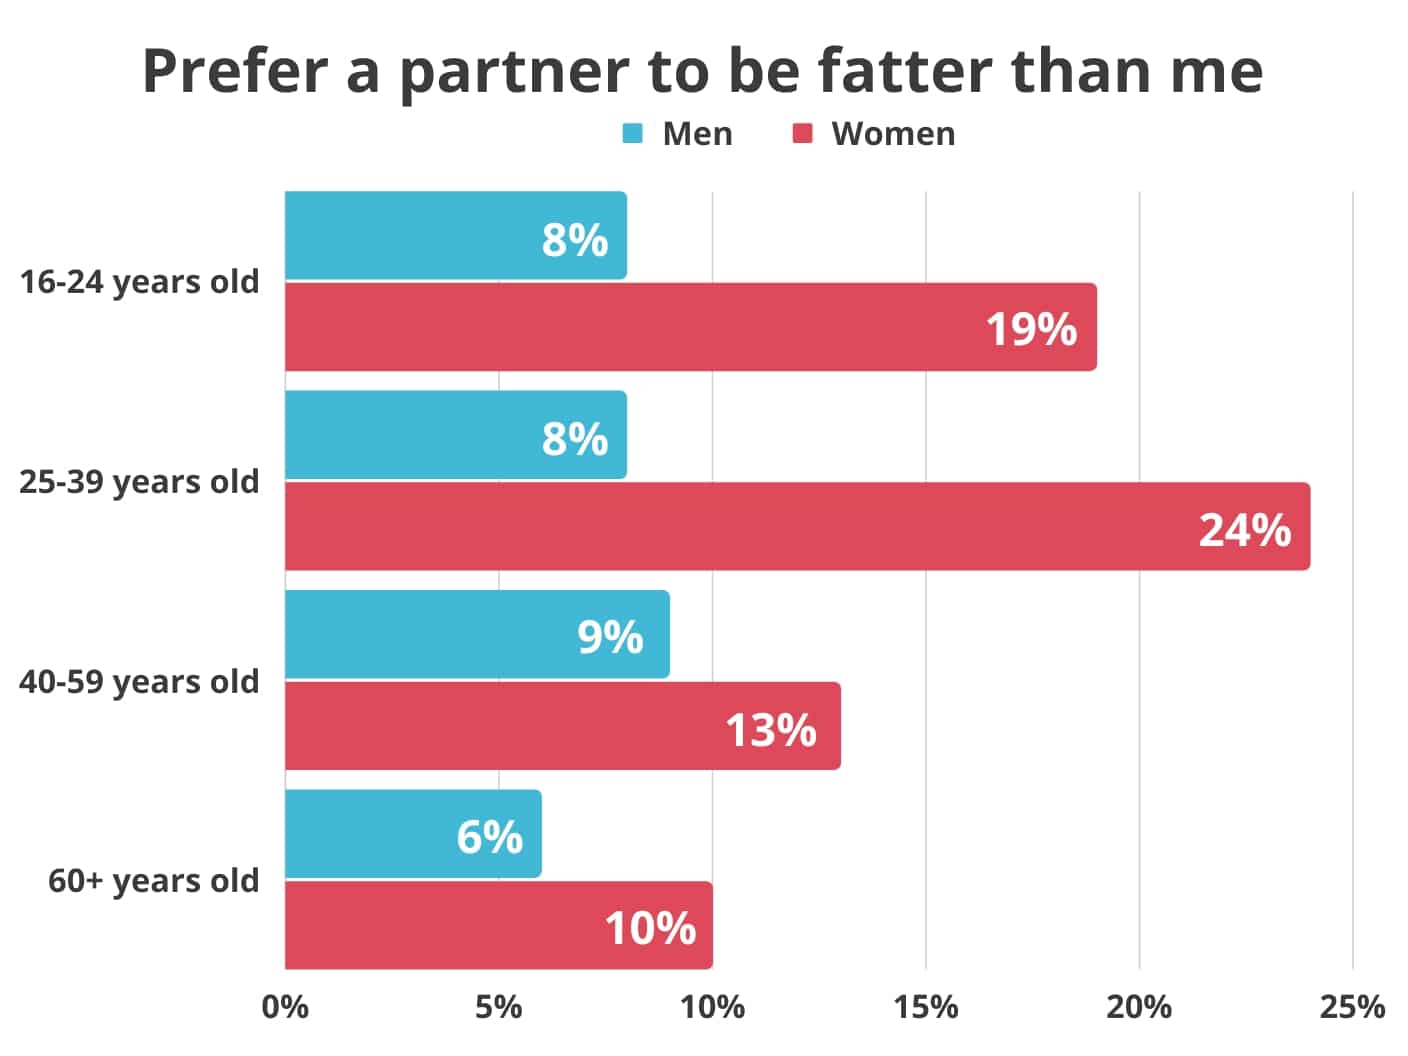 percent of people that prefer their partner is fatter than them